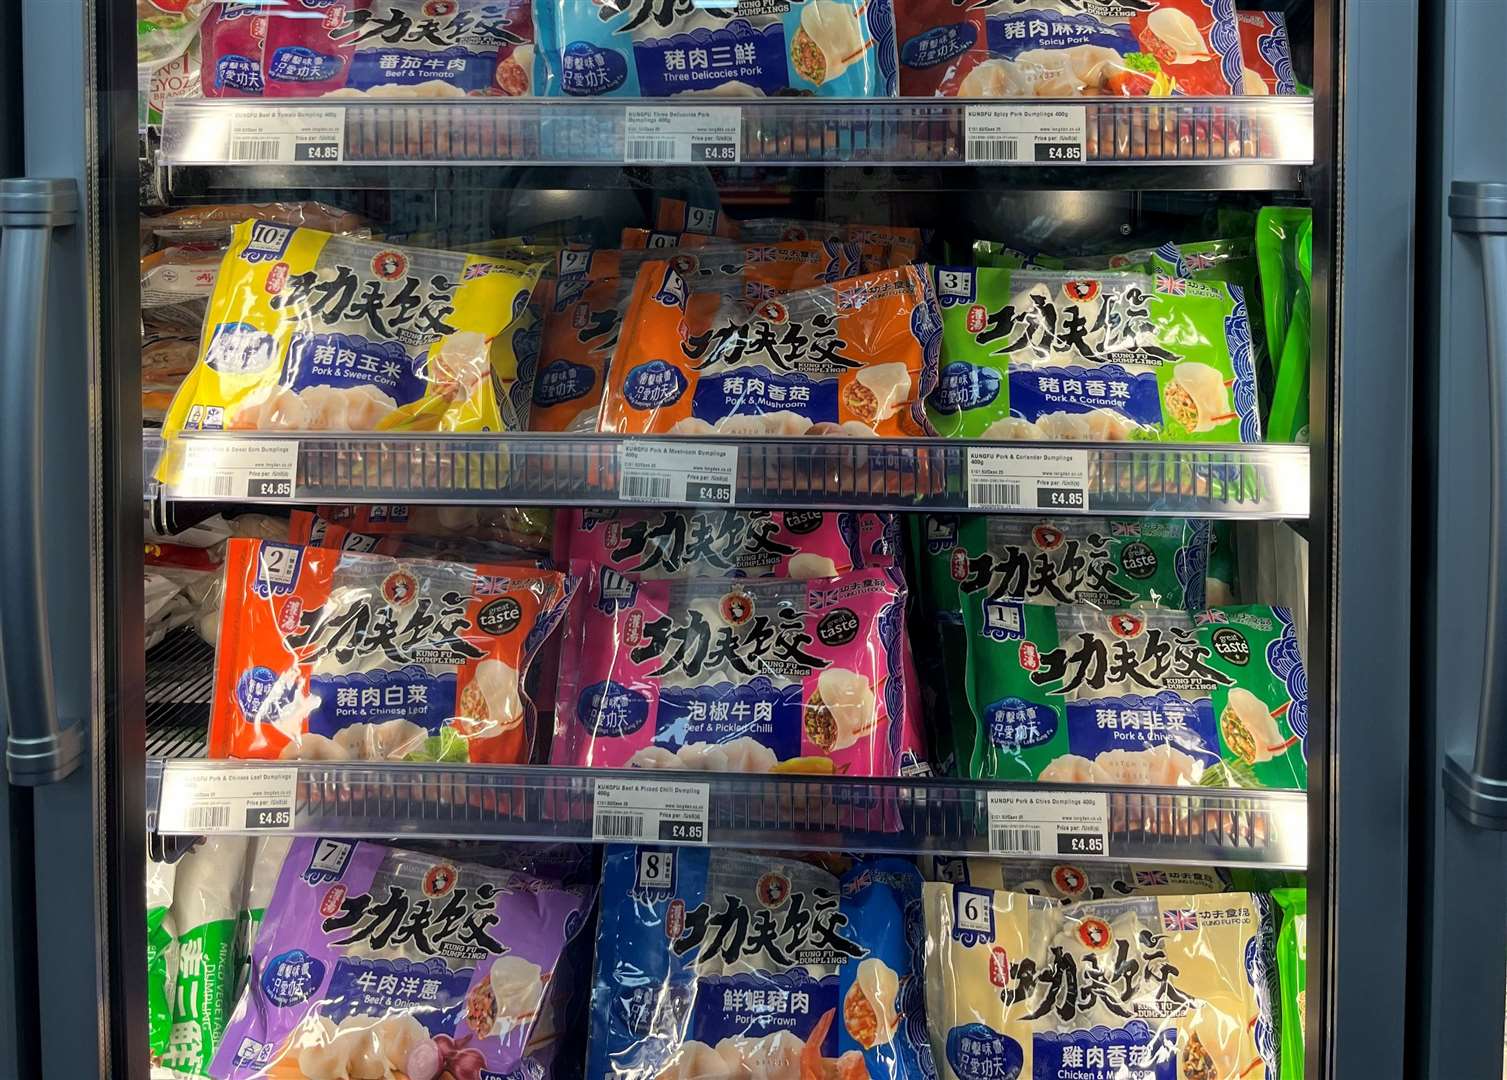 A variety of dumplings stocked in the freezer section